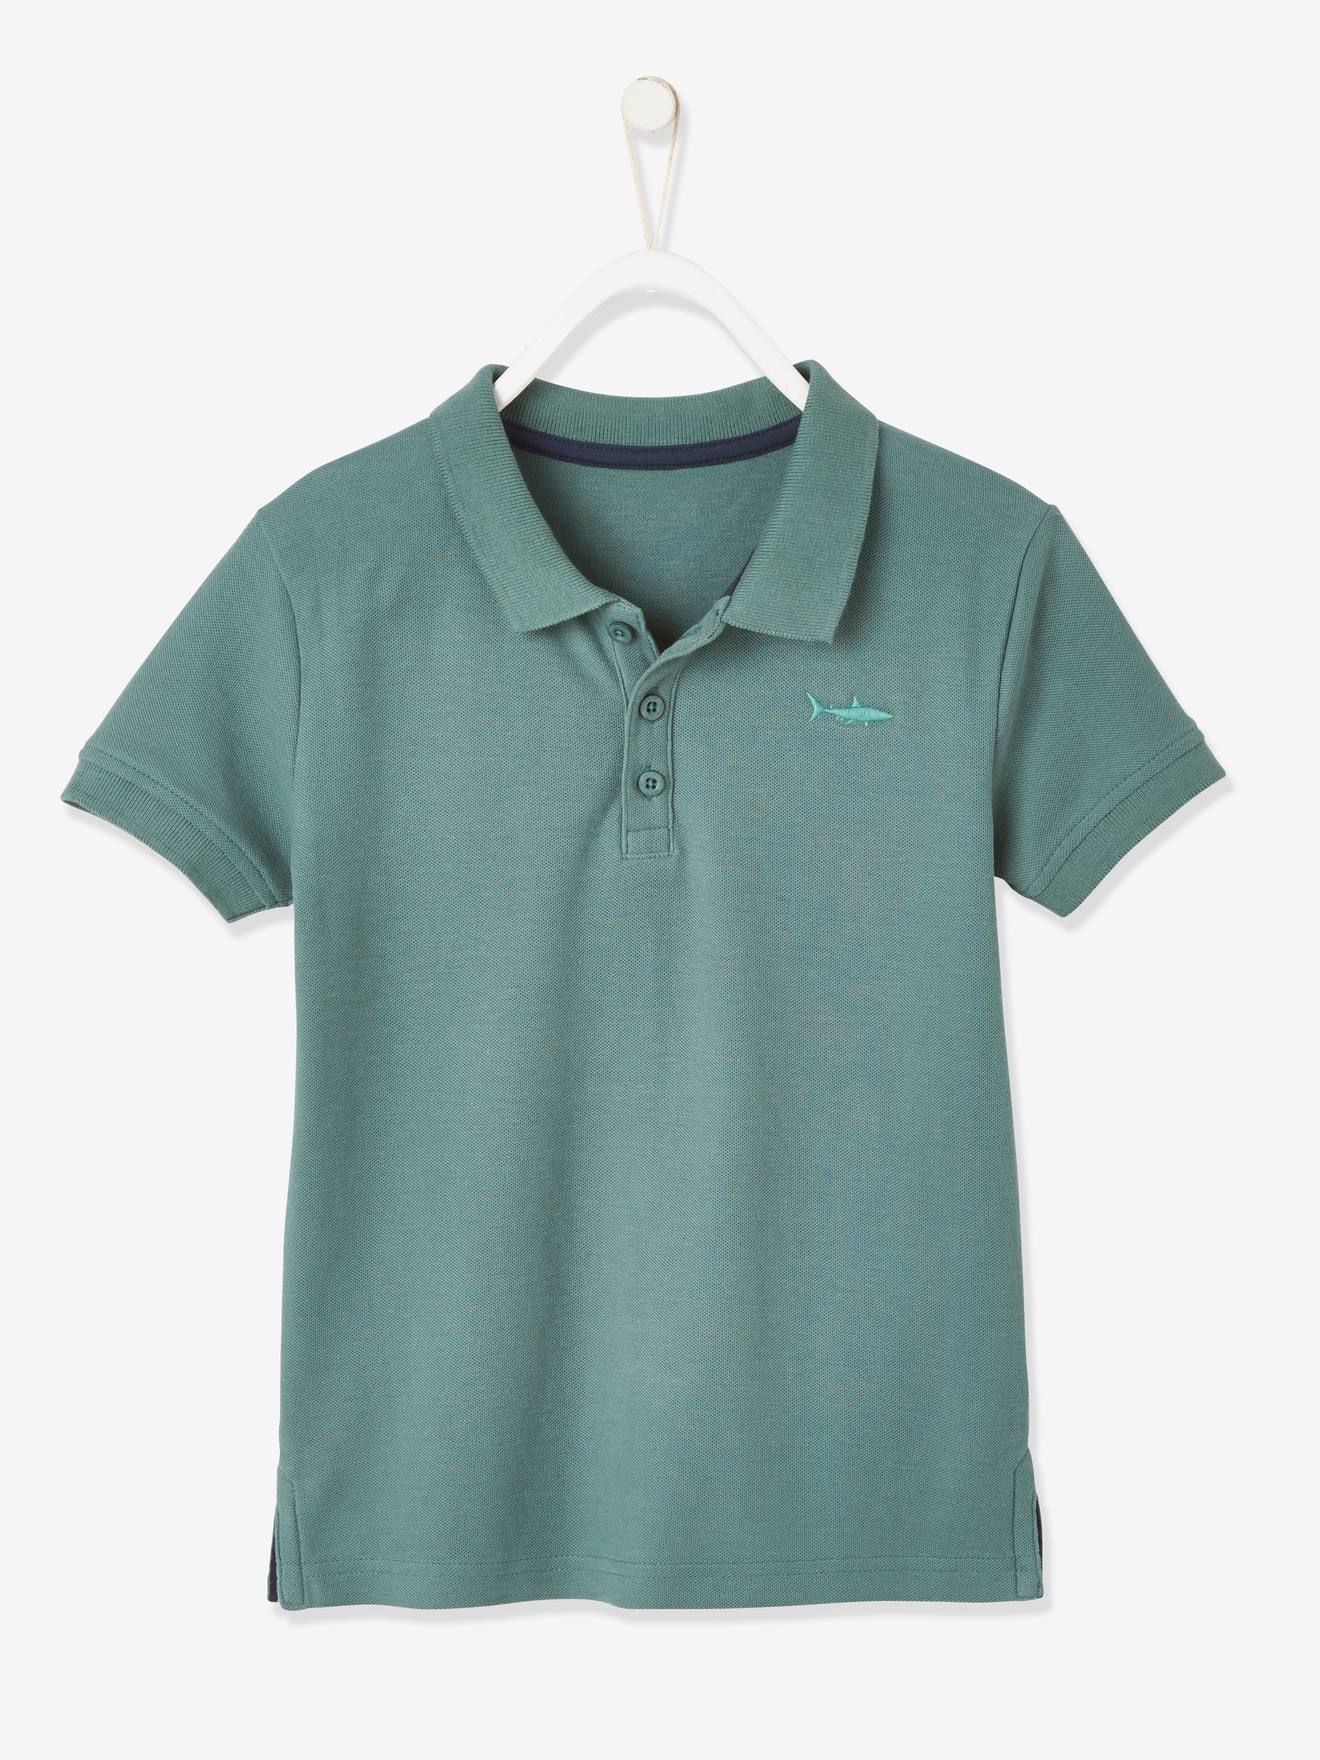 Short Sleeve Polo Shirt, Embroidery on the Chest, for Boys green